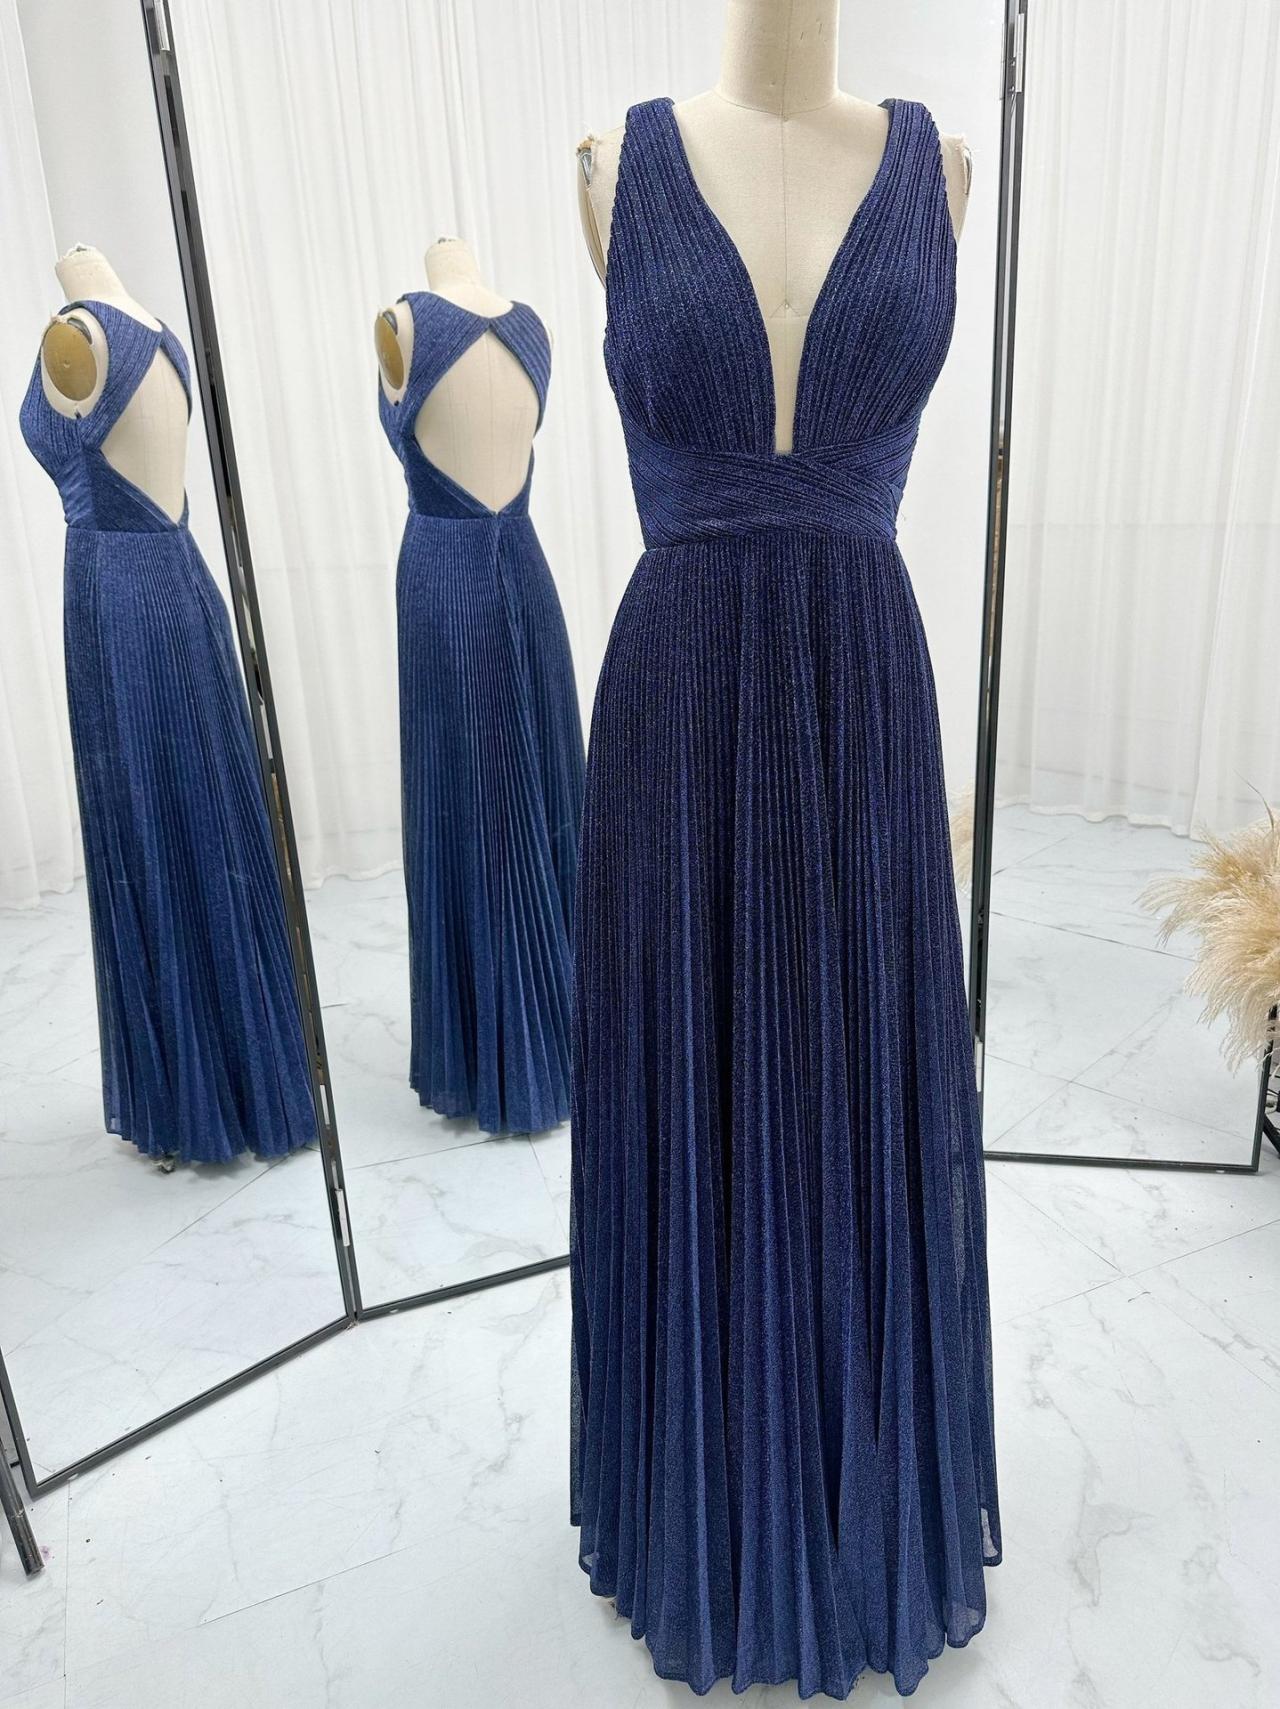 Plunging Neck Pleated Navy Prom Dress With Open Back